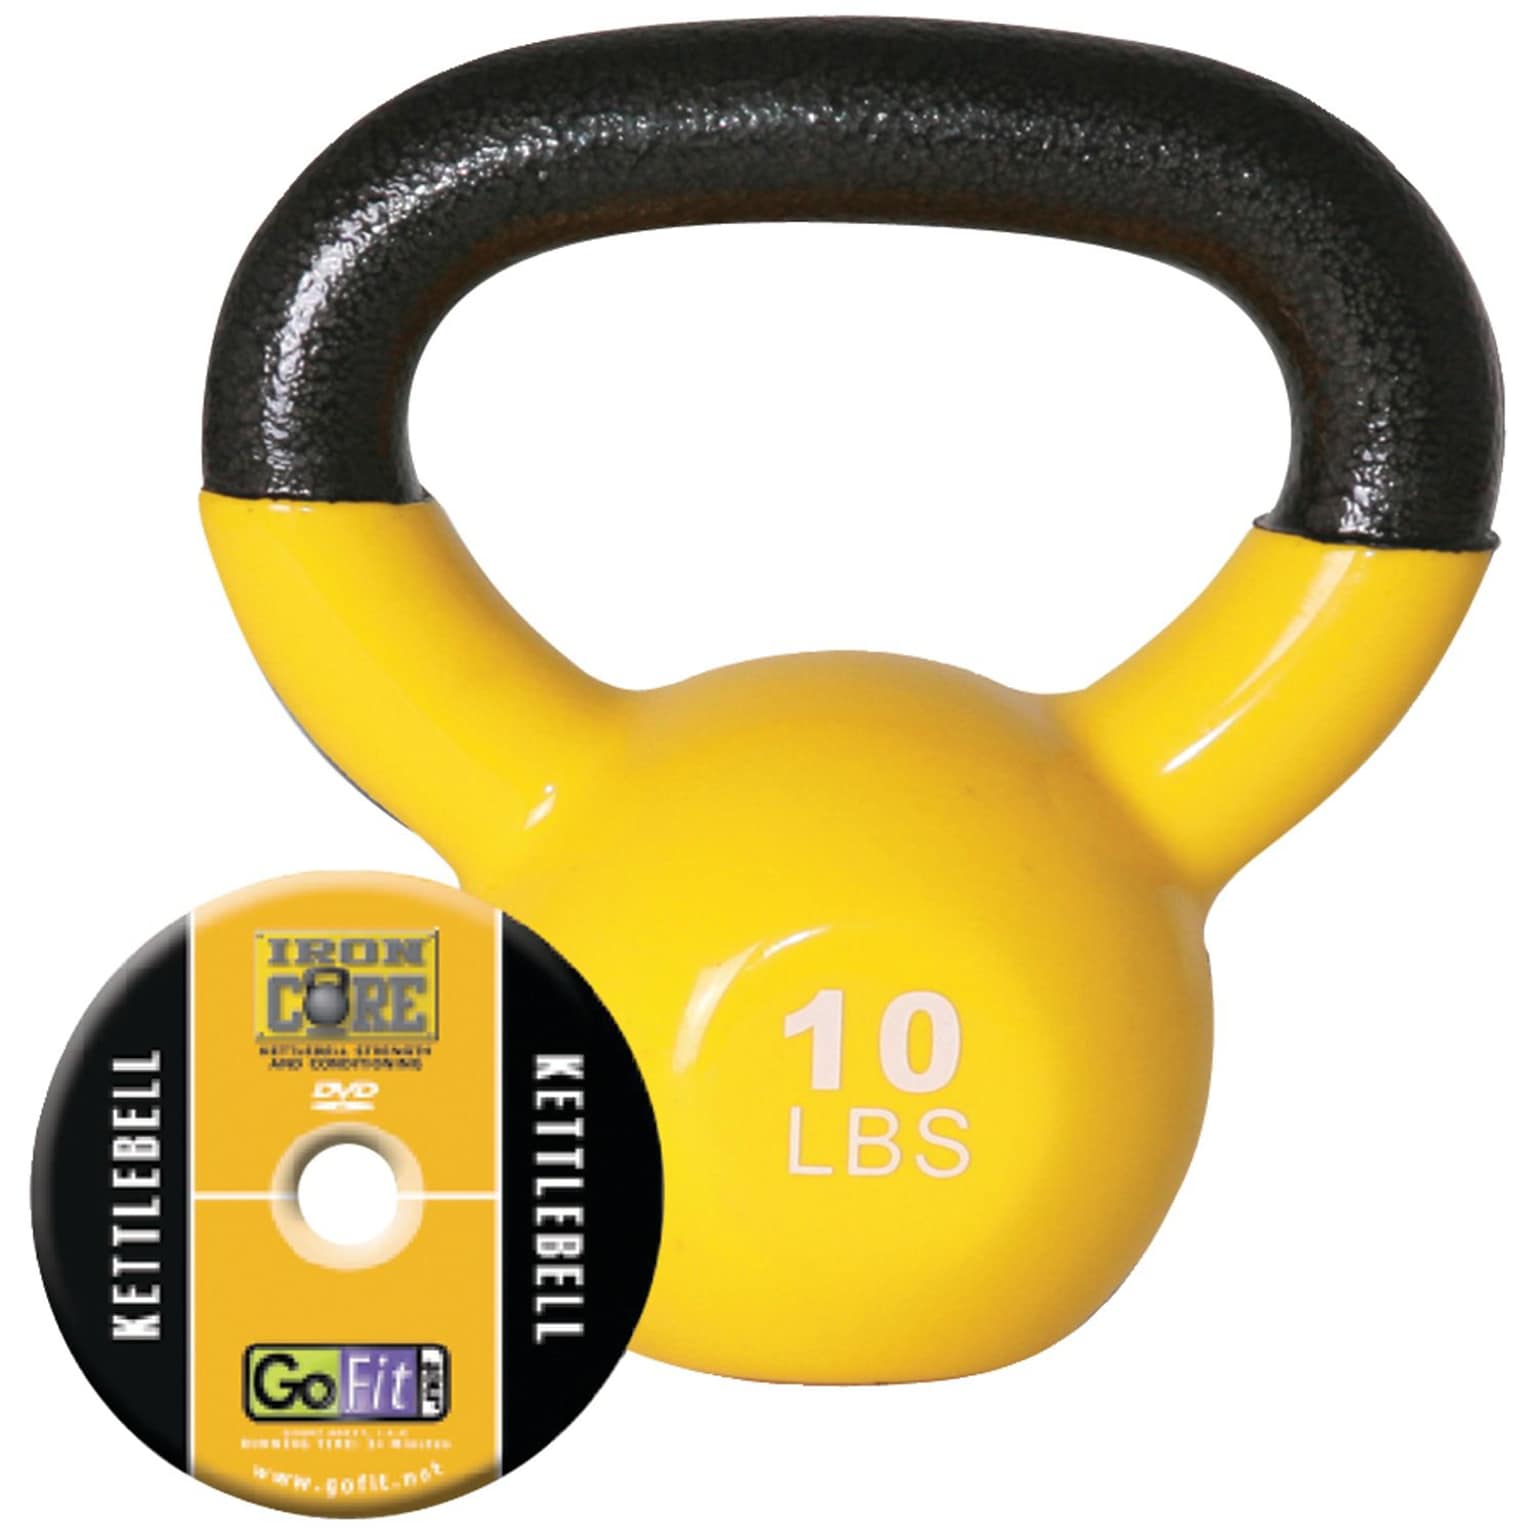 Gofit GF-KBELL10 Vinyl-Dipped Kettelbell And Iron Core Training DVD; Yellow